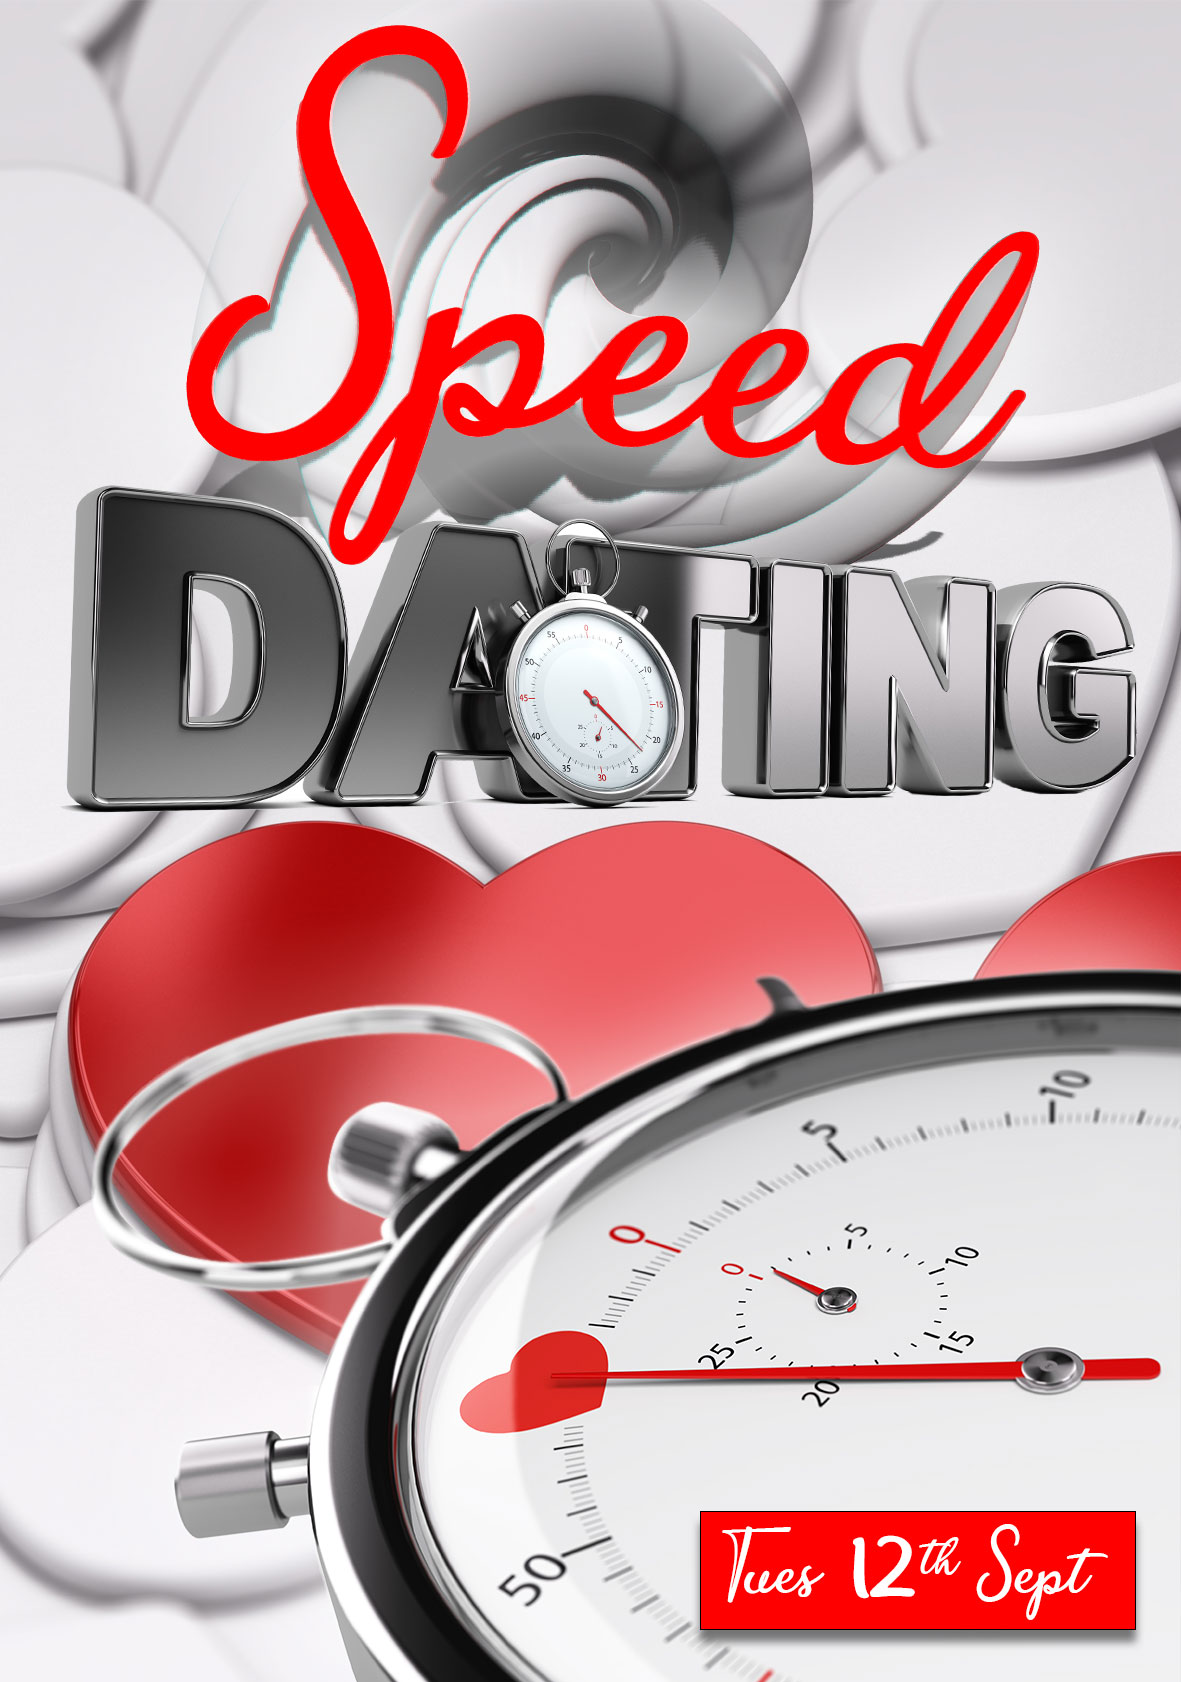 Rushed Love & Soul Mate searching - Speed dating Event poster